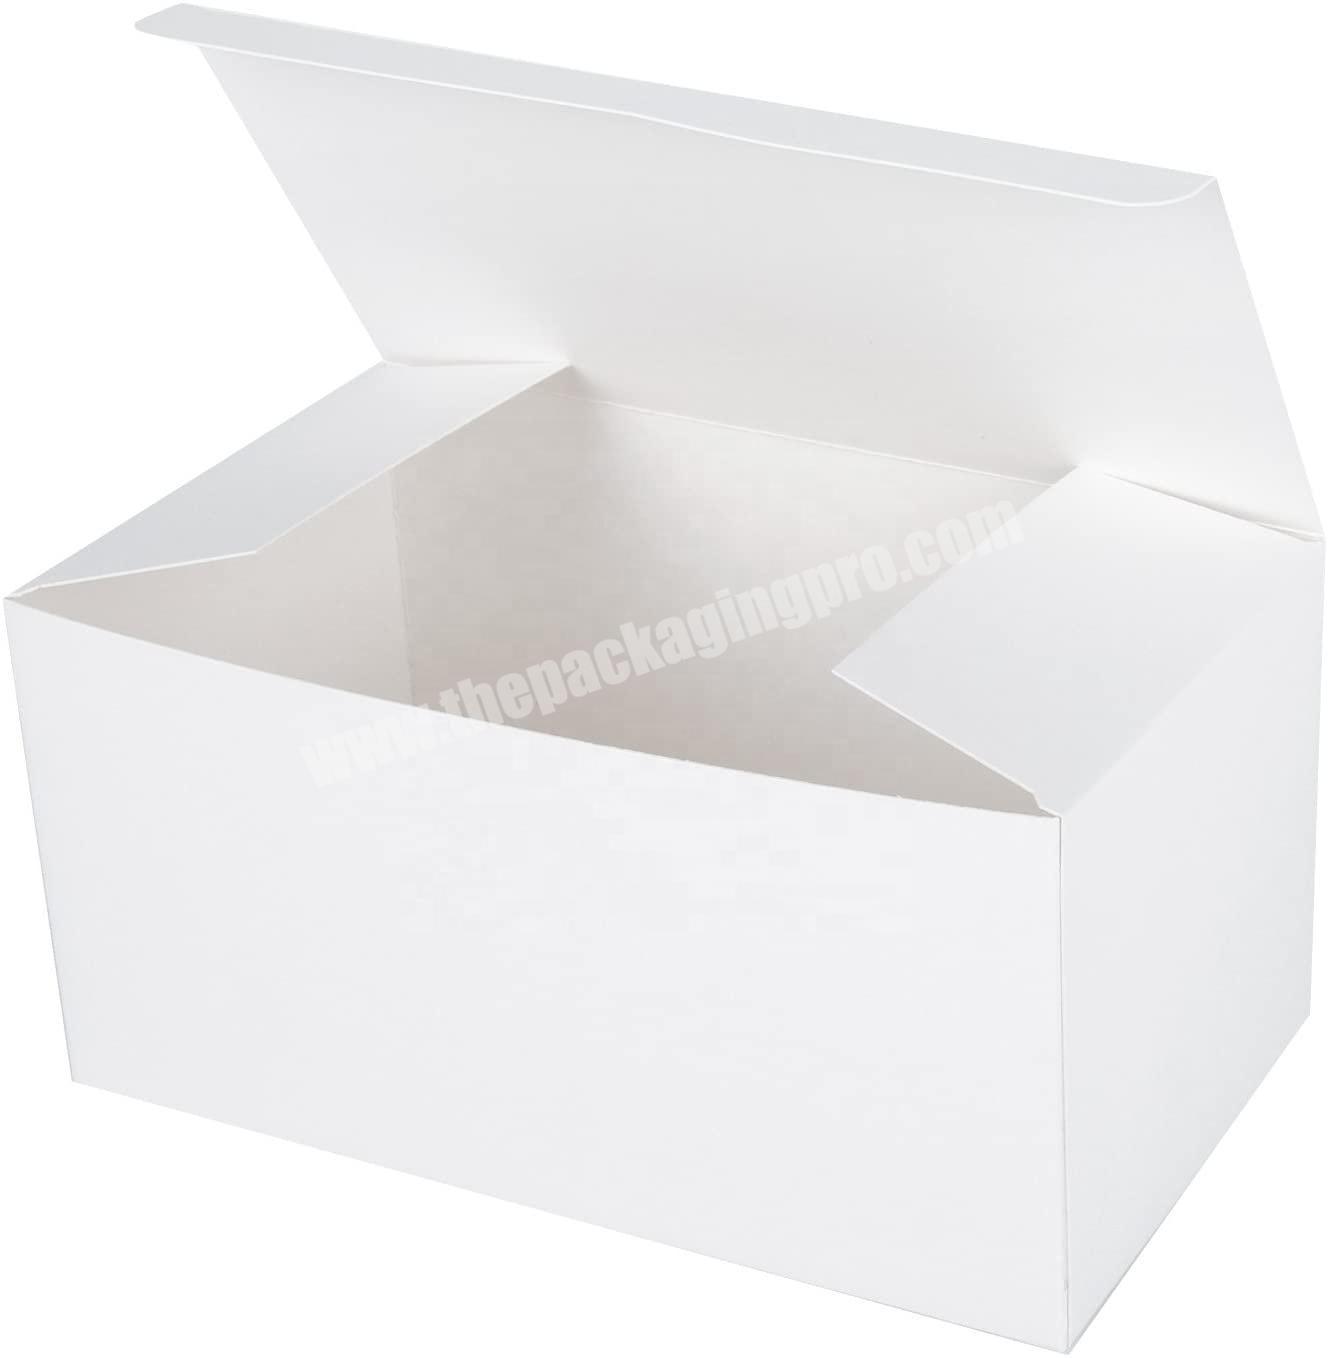 Recycled Gift Boxes White Paper Box Kraft Cardboard Boxes with Lids